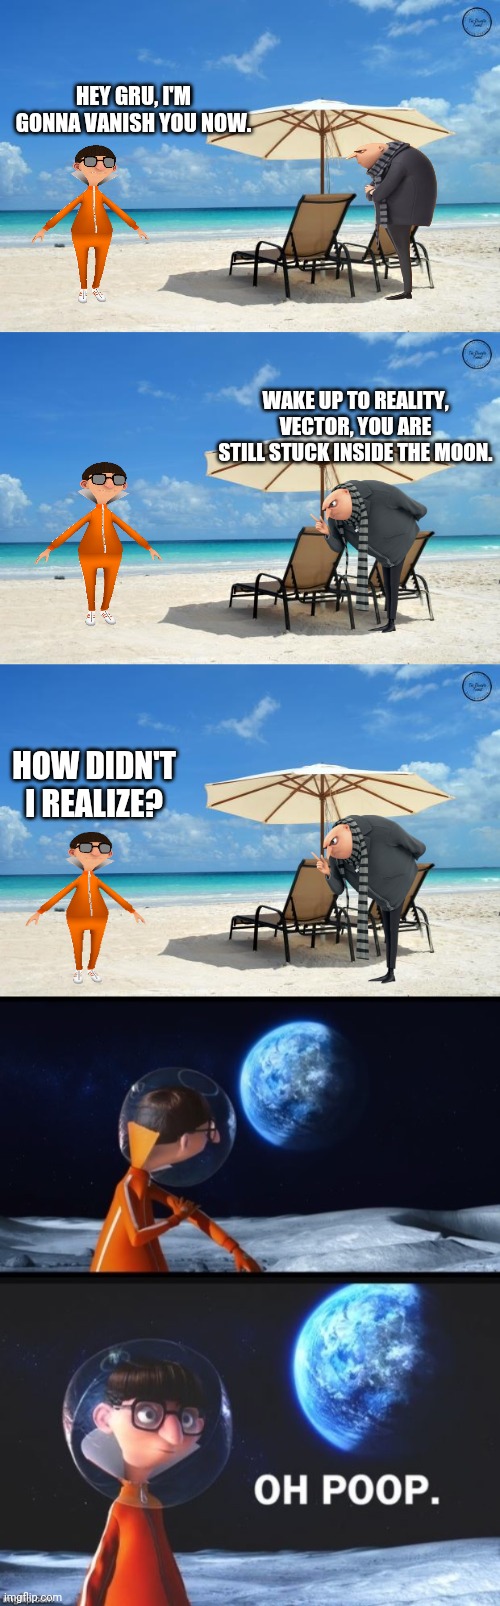 Vector snapped back to reality. | HEY GRU, I'M GONNA VANISH YOU NOW. WAKE UP TO REALITY, VECTOR, YOU ARE STILL STUCK INSIDE THE MOON. HOW DIDN'T I REALIZE? | image tagged in beach,vector oh poop meme,gru,vector,moon | made w/ Imgflip meme maker